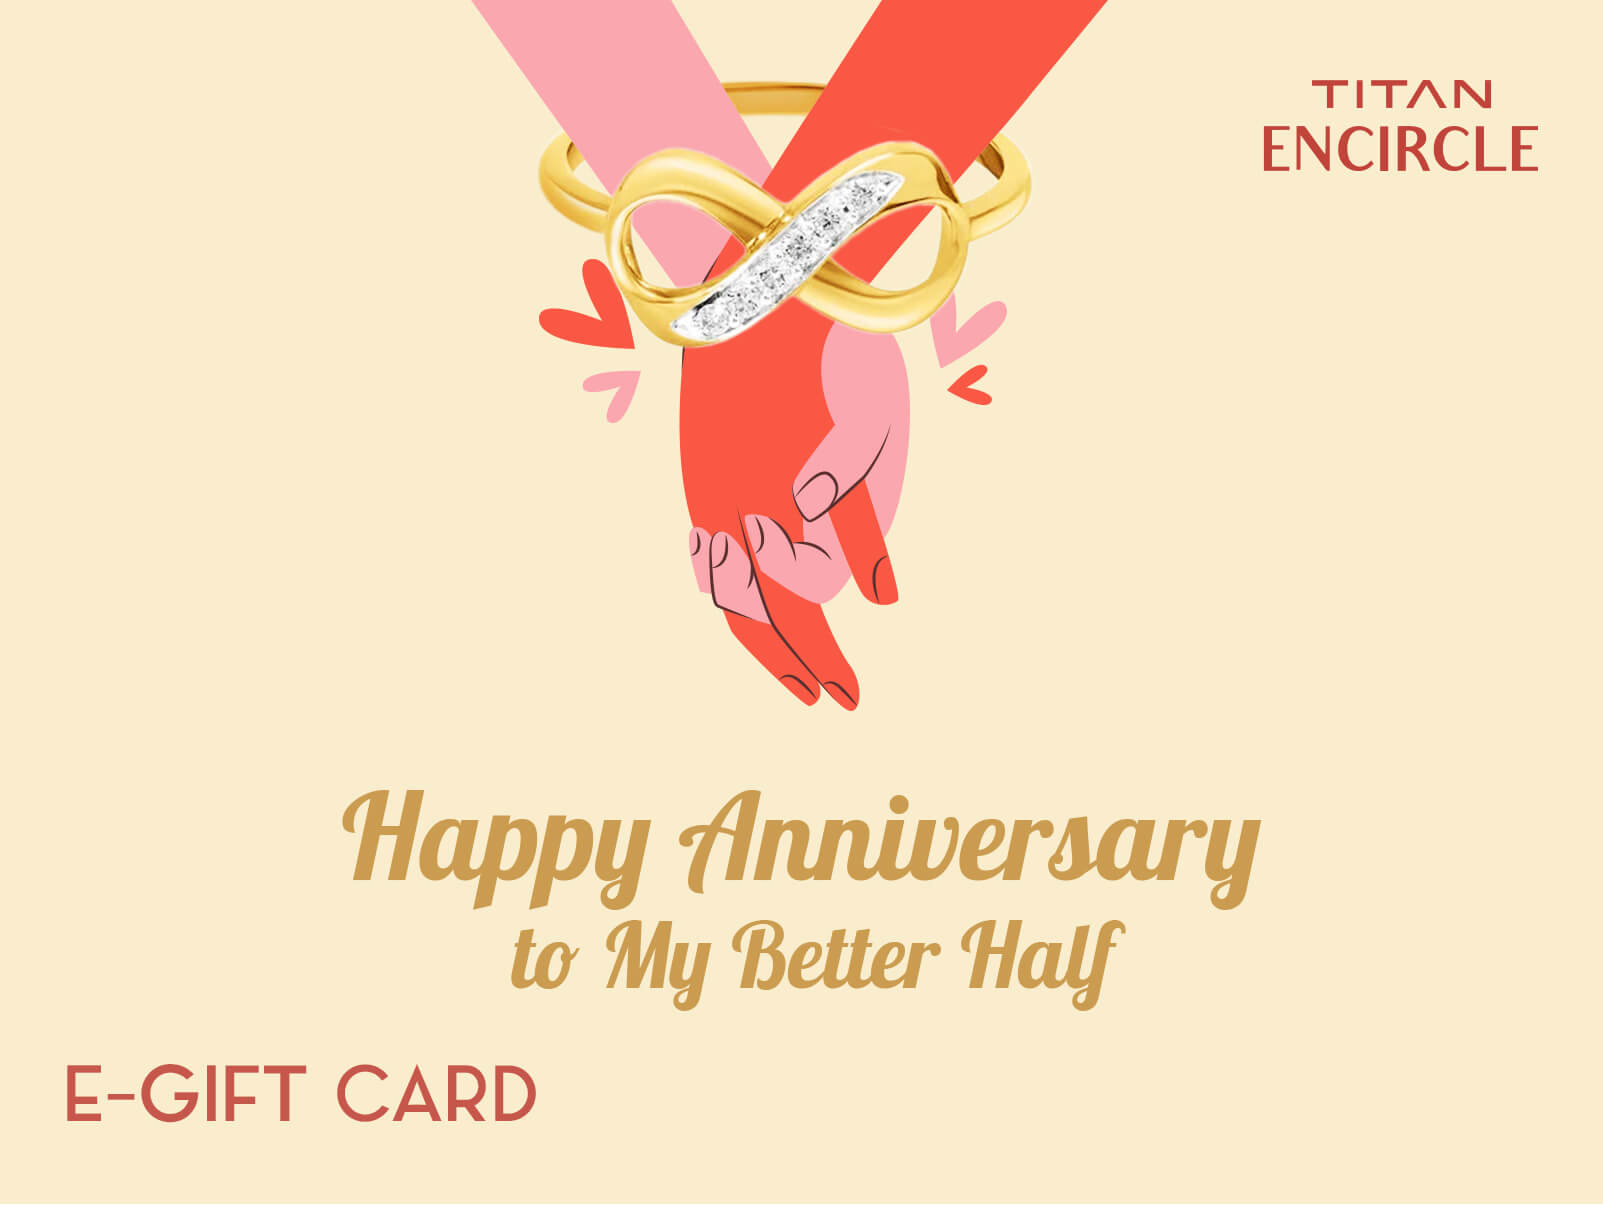 Shop Gift Card on Anniversary